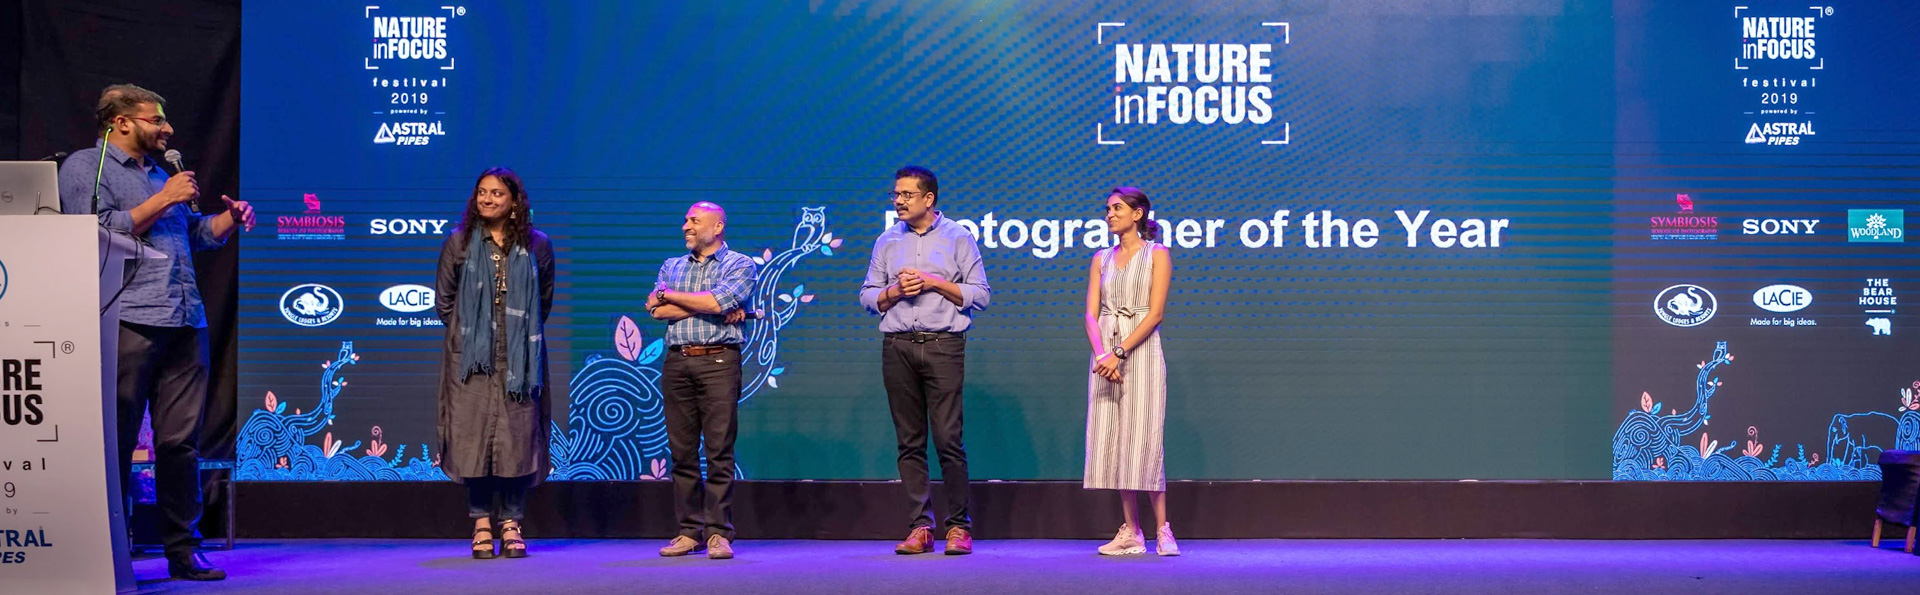 Festival - Nature travel, wildlife photography and conservation stories from India | Nature inFocus 